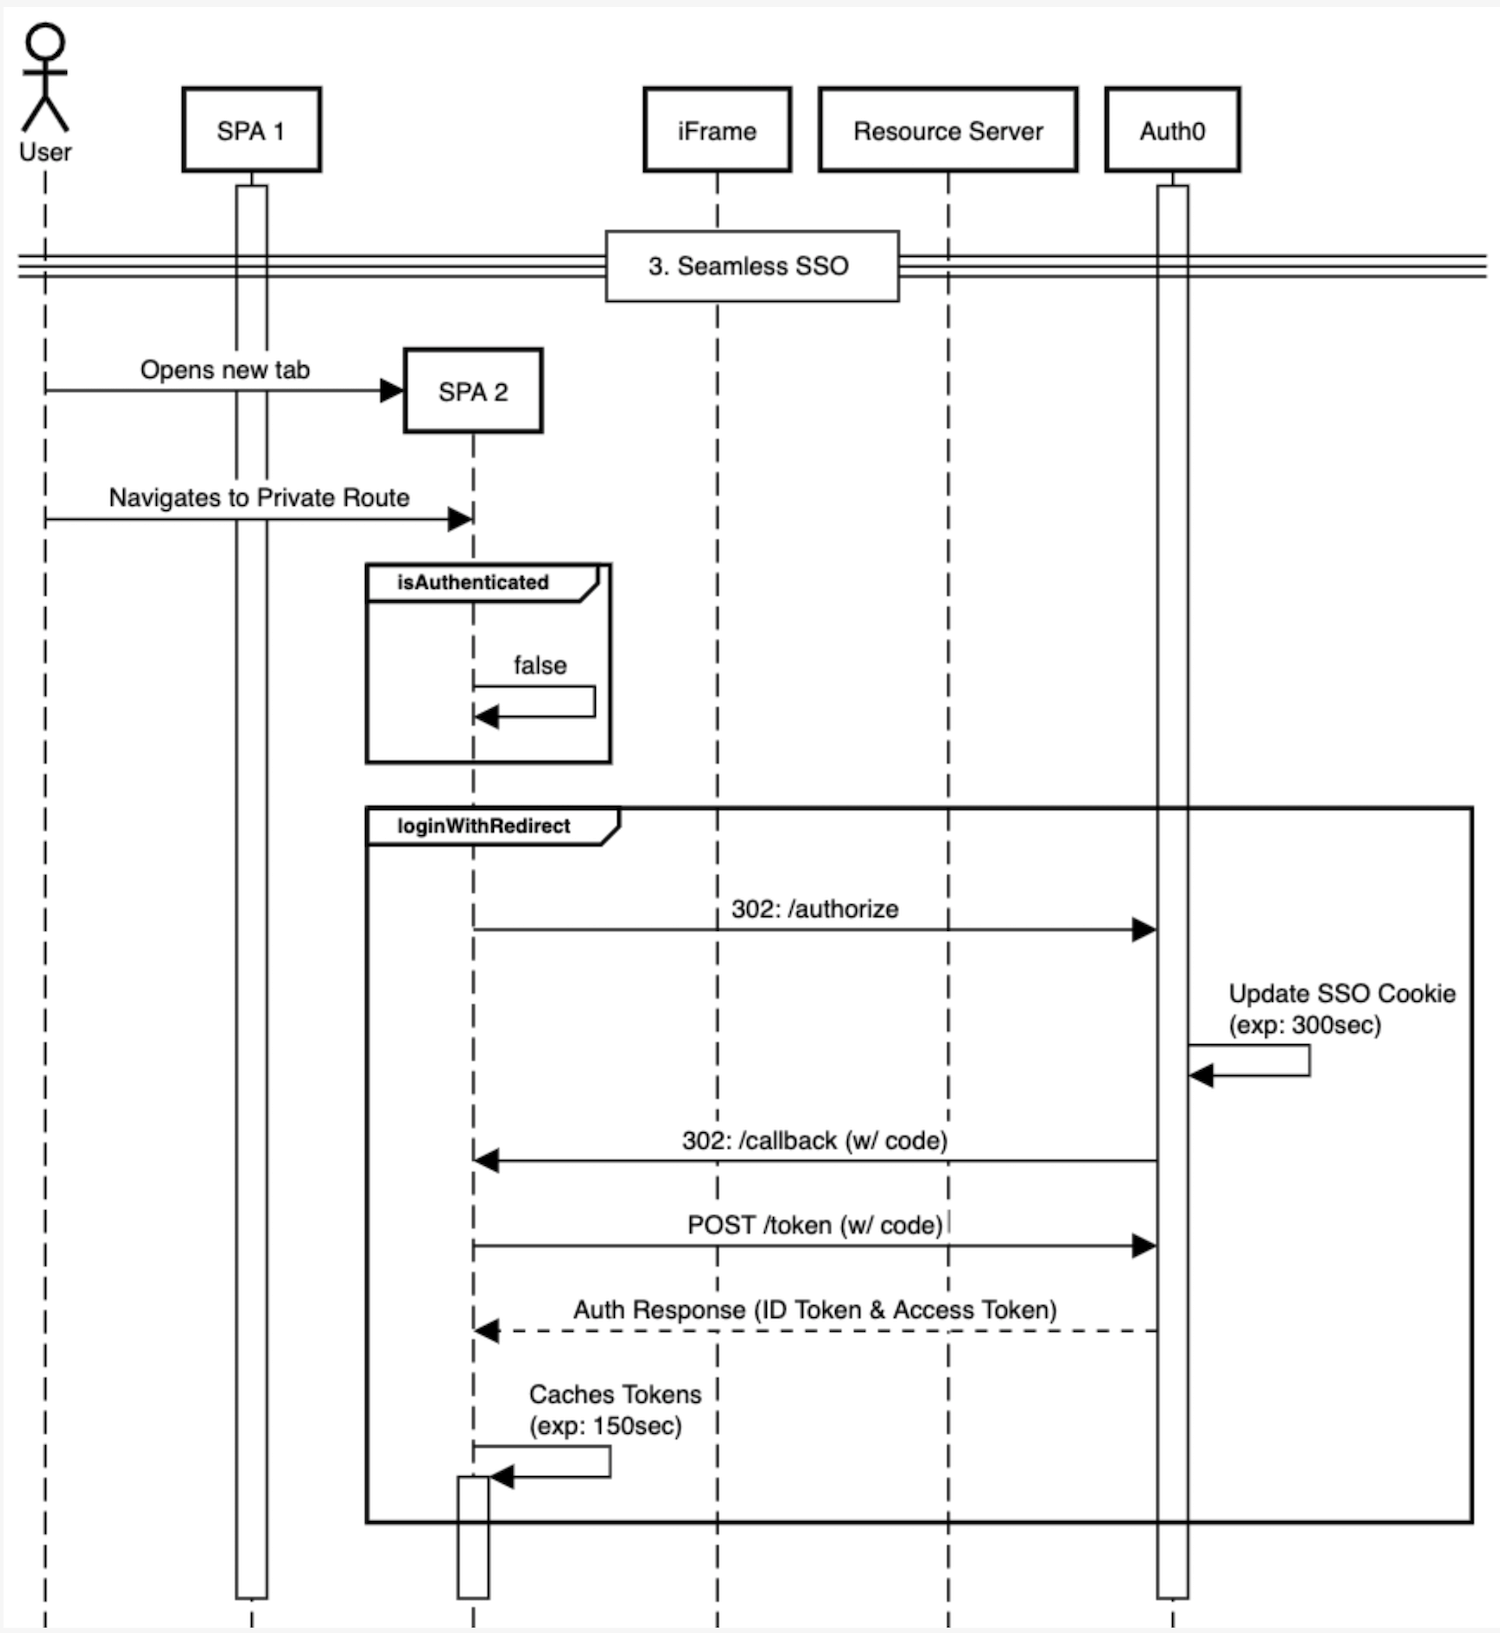 Diagram of seamless SSO flow for sessions